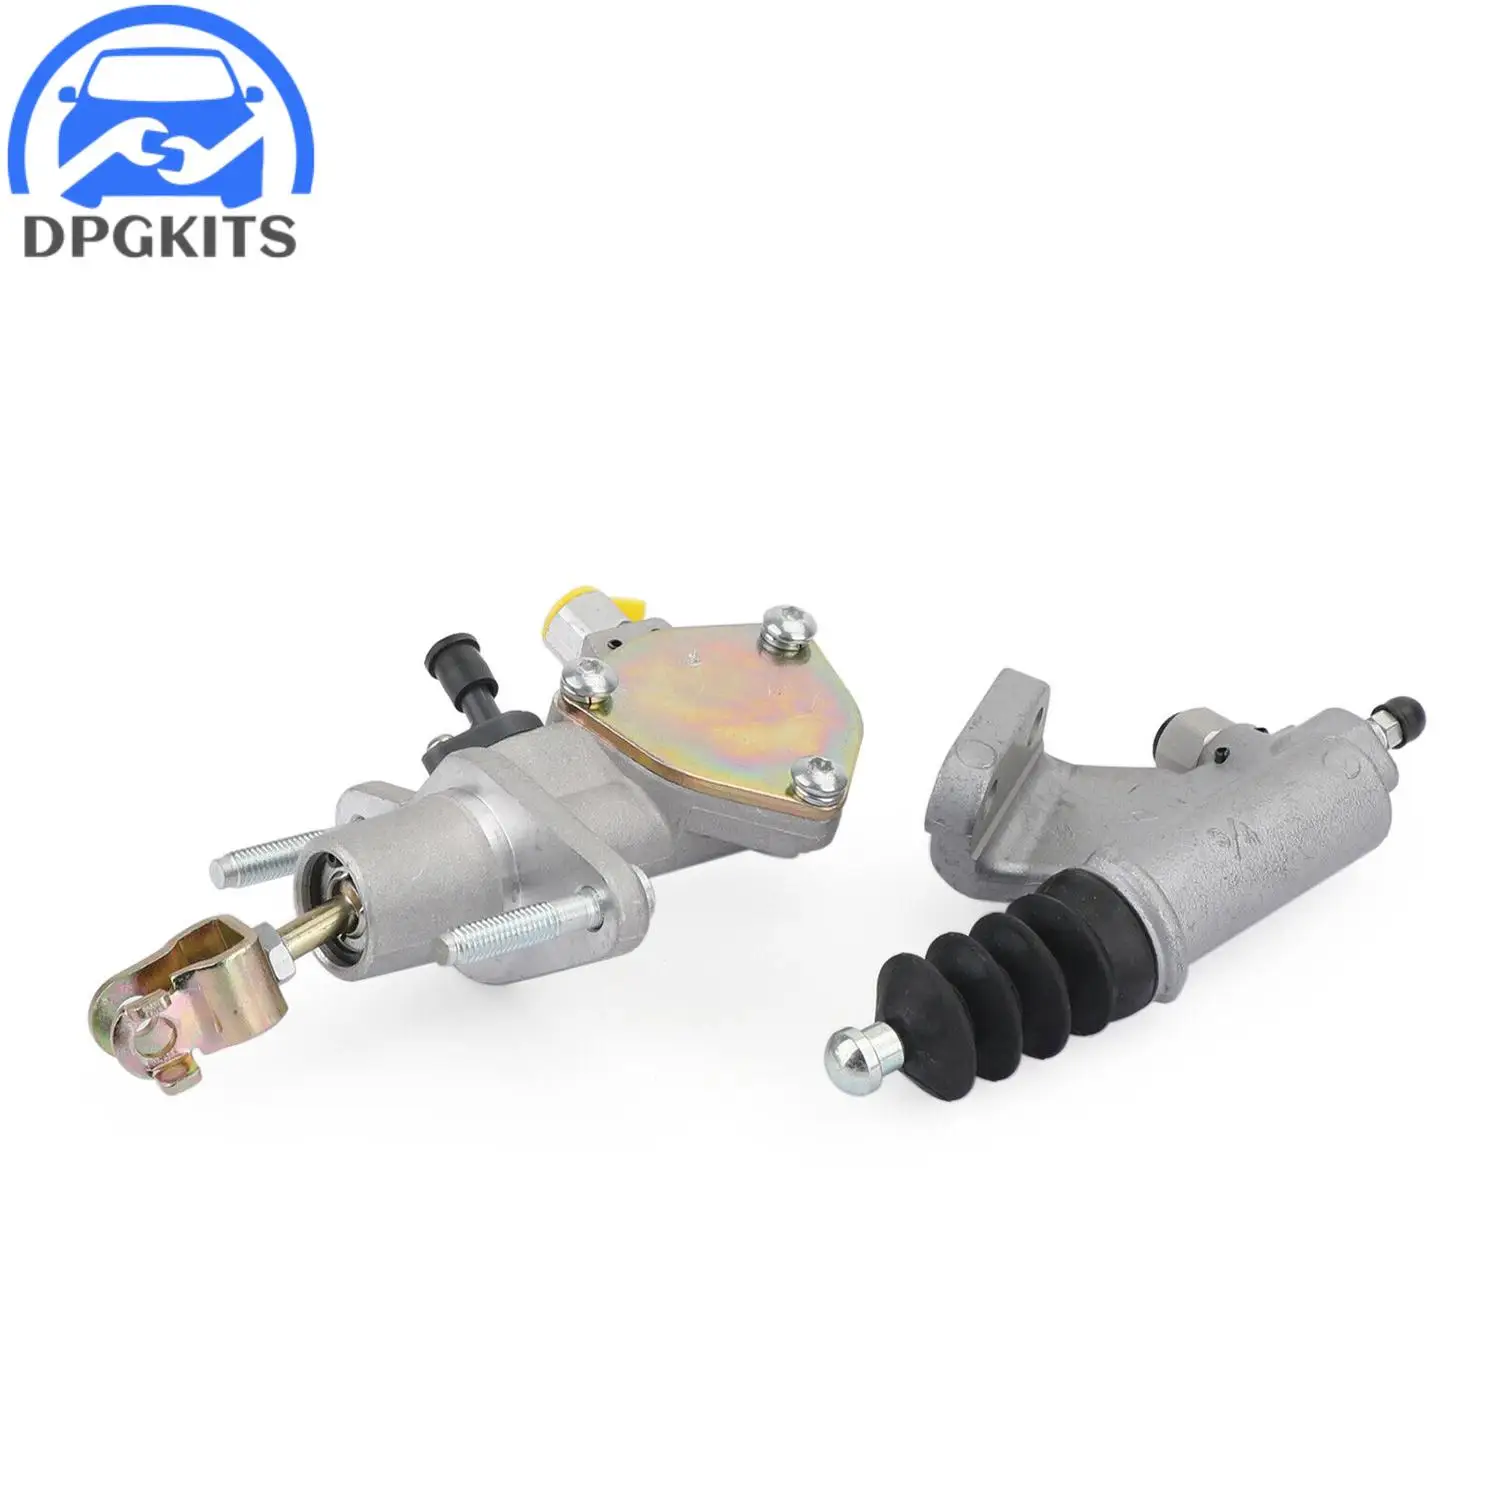 

2pcs 46920-S7A-A03 46920-S7A-A01 Clutch Master + Slave Cylinder For Honda Civic Accord CRV Element For Acura RSX TSX